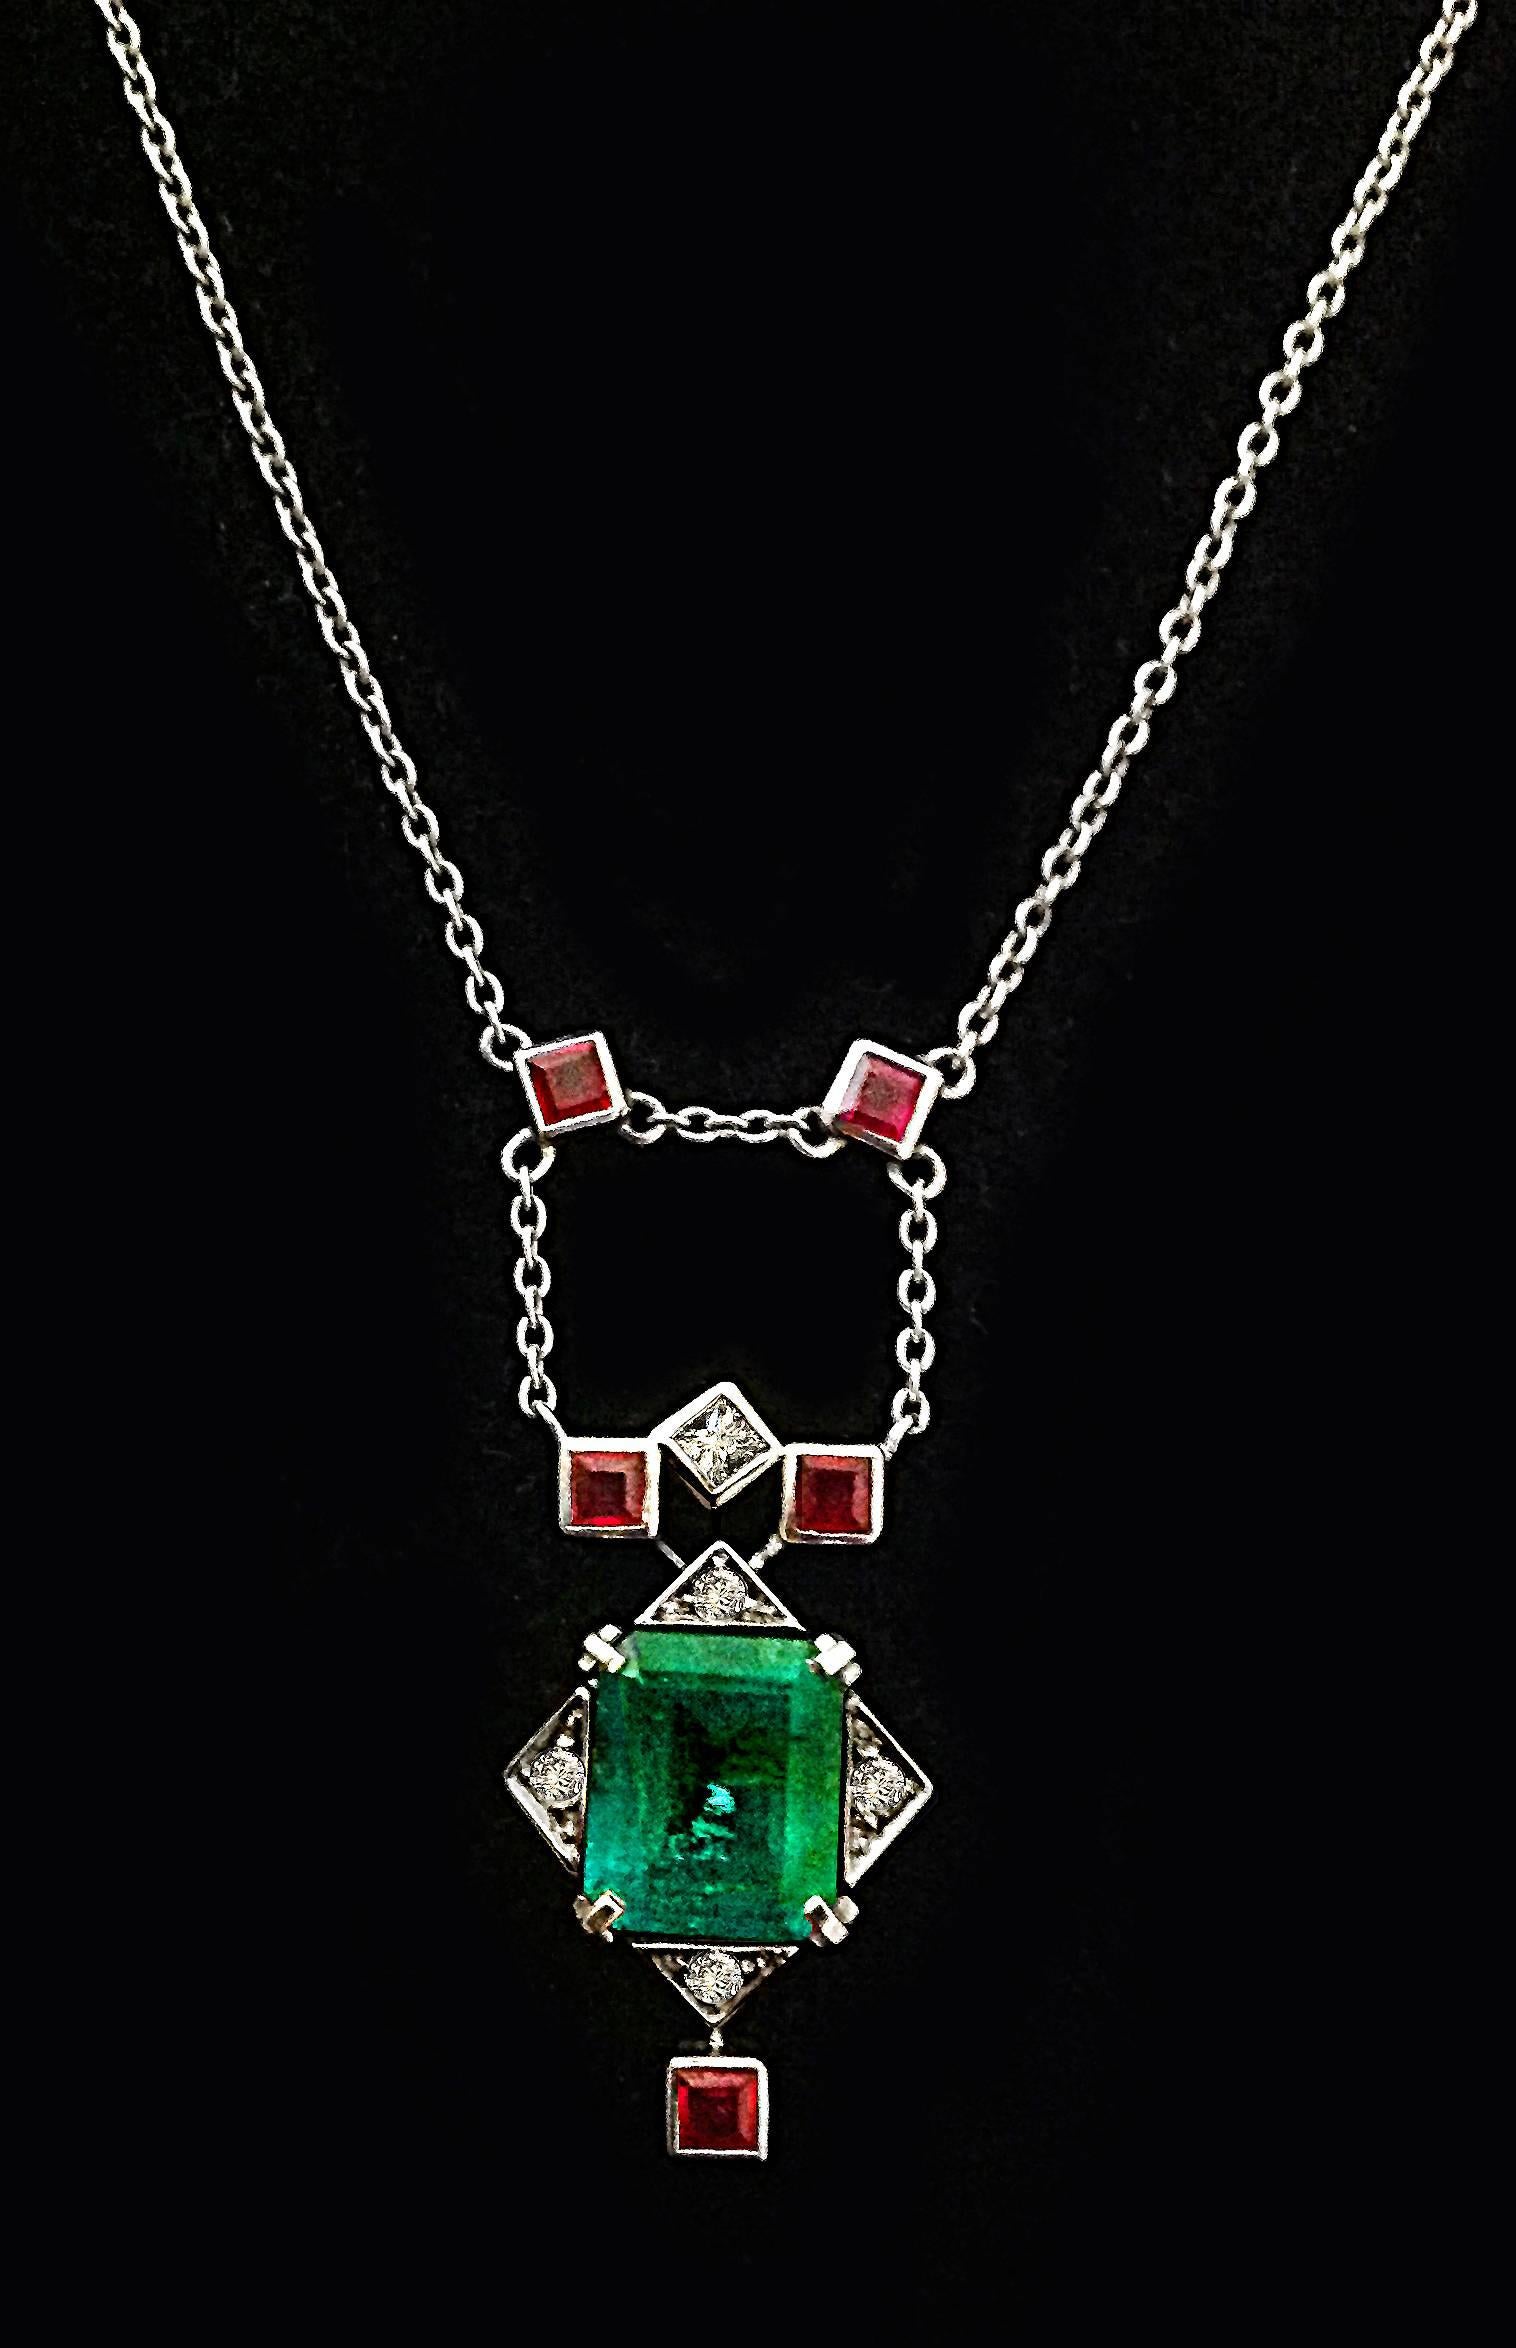 Dalben design 2,38 carat emerald monted in 18 kt white gold pendant necklace.
The emerald is surrounded by diamonds ct. 0,18 circa and ruby 0,25 ct. circa.
Pendant dimension:
width 11,7 mm 
height 21,7 mm
Chain length 42 mm resizable
The necklace